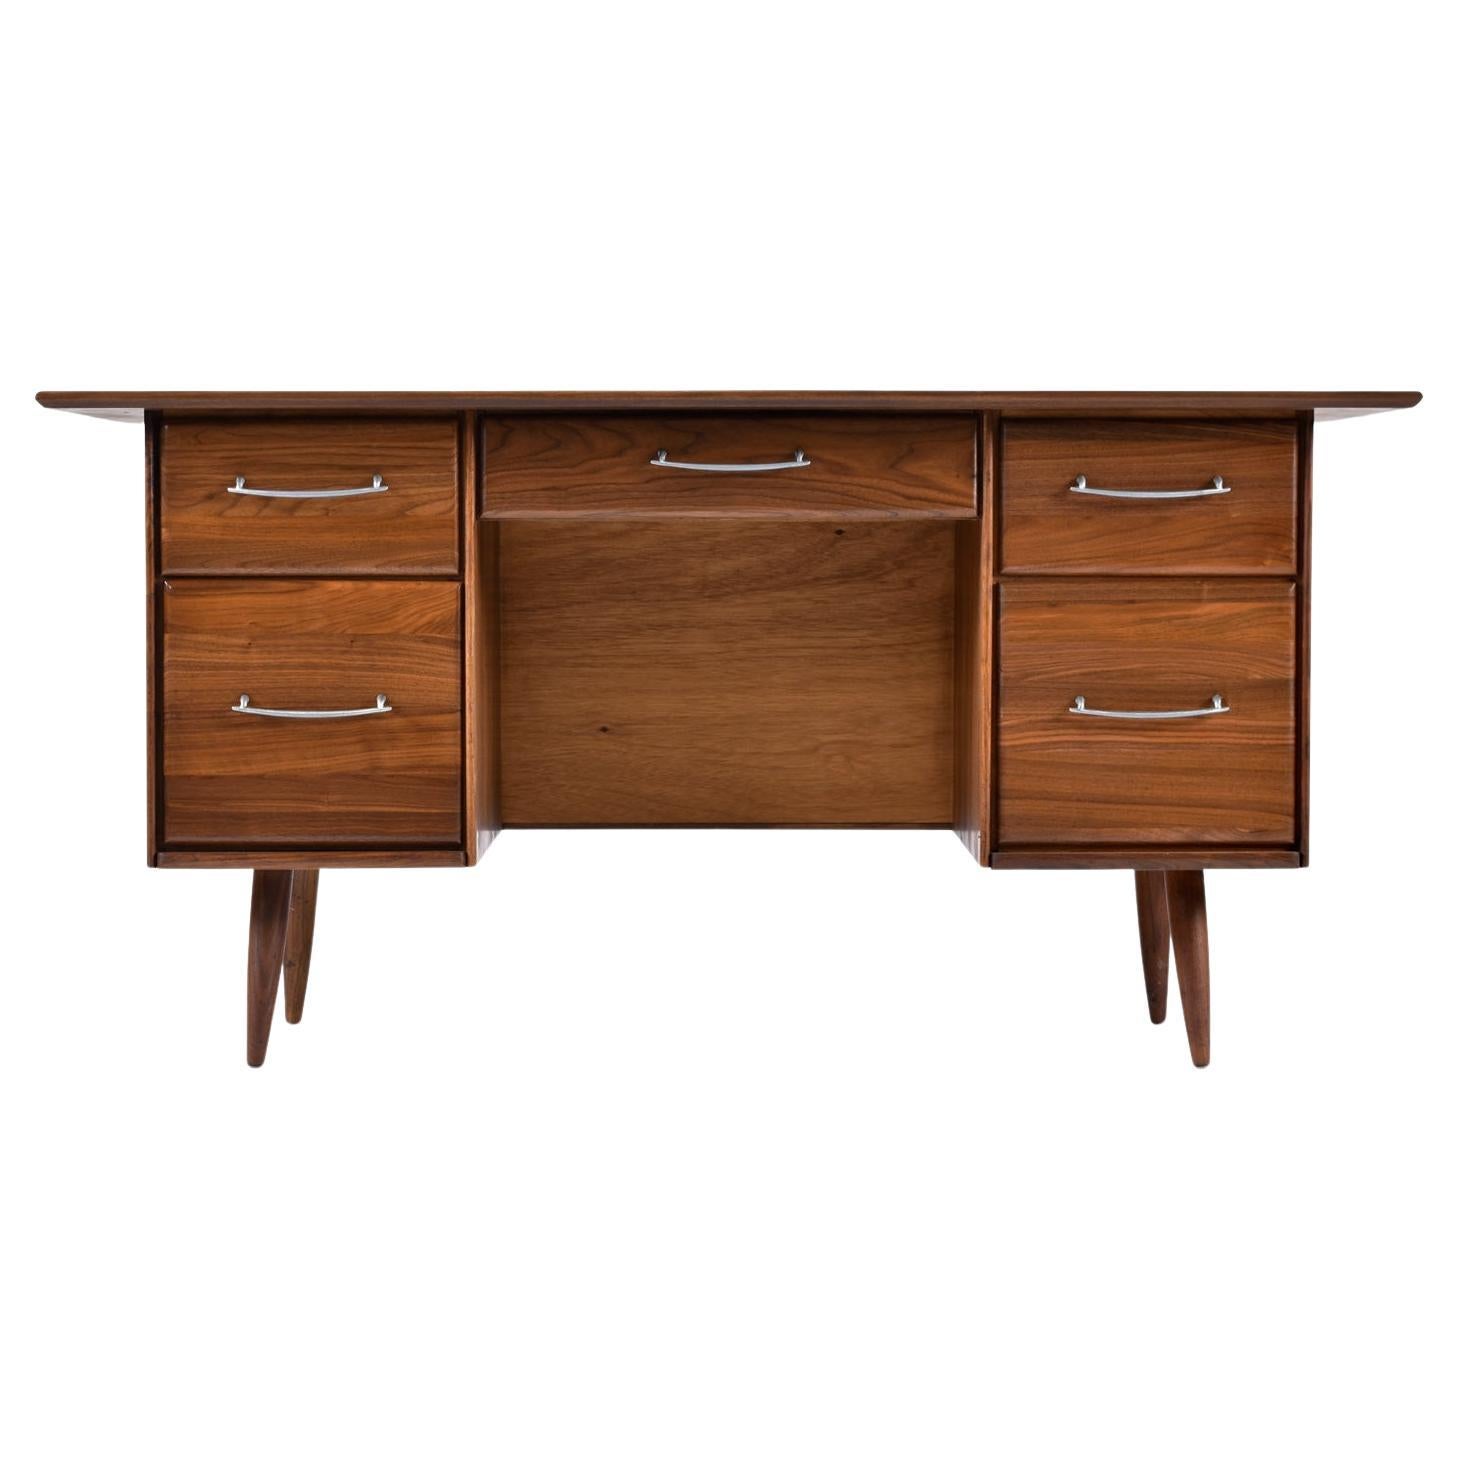 Extraordinary Mid-Century Modern walnut desk with ample storage. Achieve ultimate and storage, function and style with this relatively compact desk. Place this desk anywhere! It’s finished on both the front and back sides. There are five drawers,